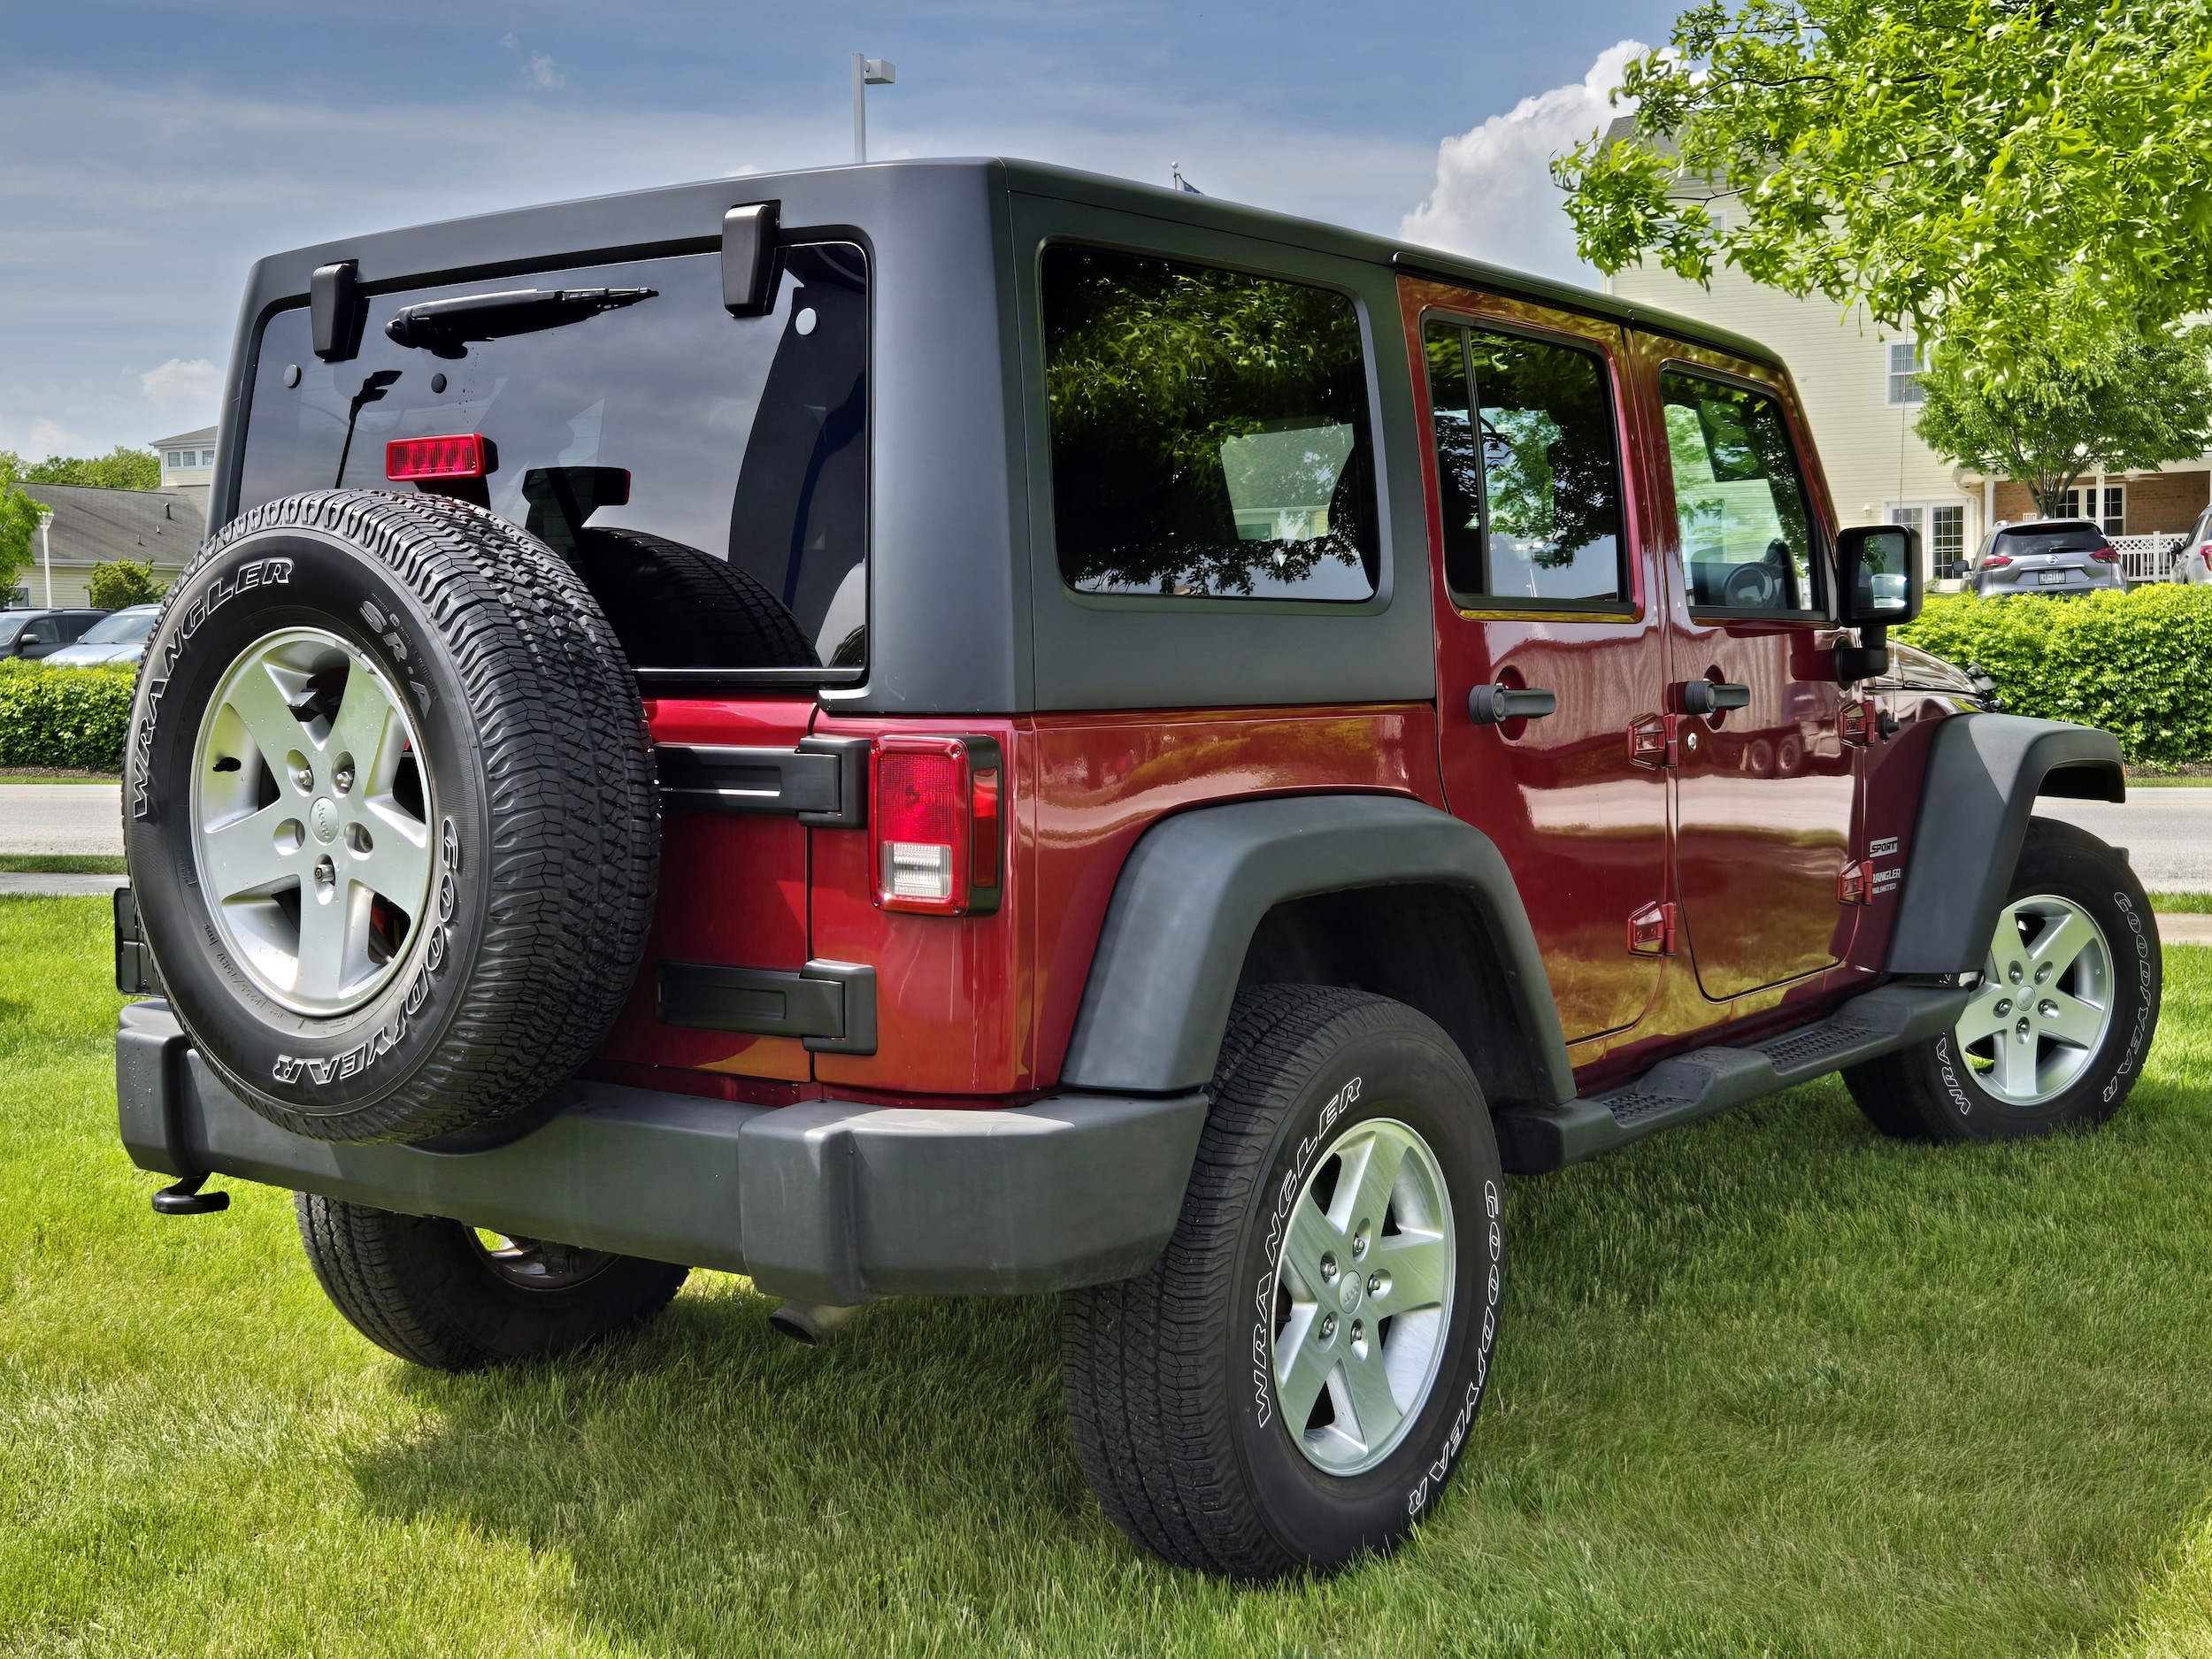 Used 2013 Jeep Wrangler Unlimited Sport with VIN 1C4BJWDG4DL589817 for sale in Taneytown, MD